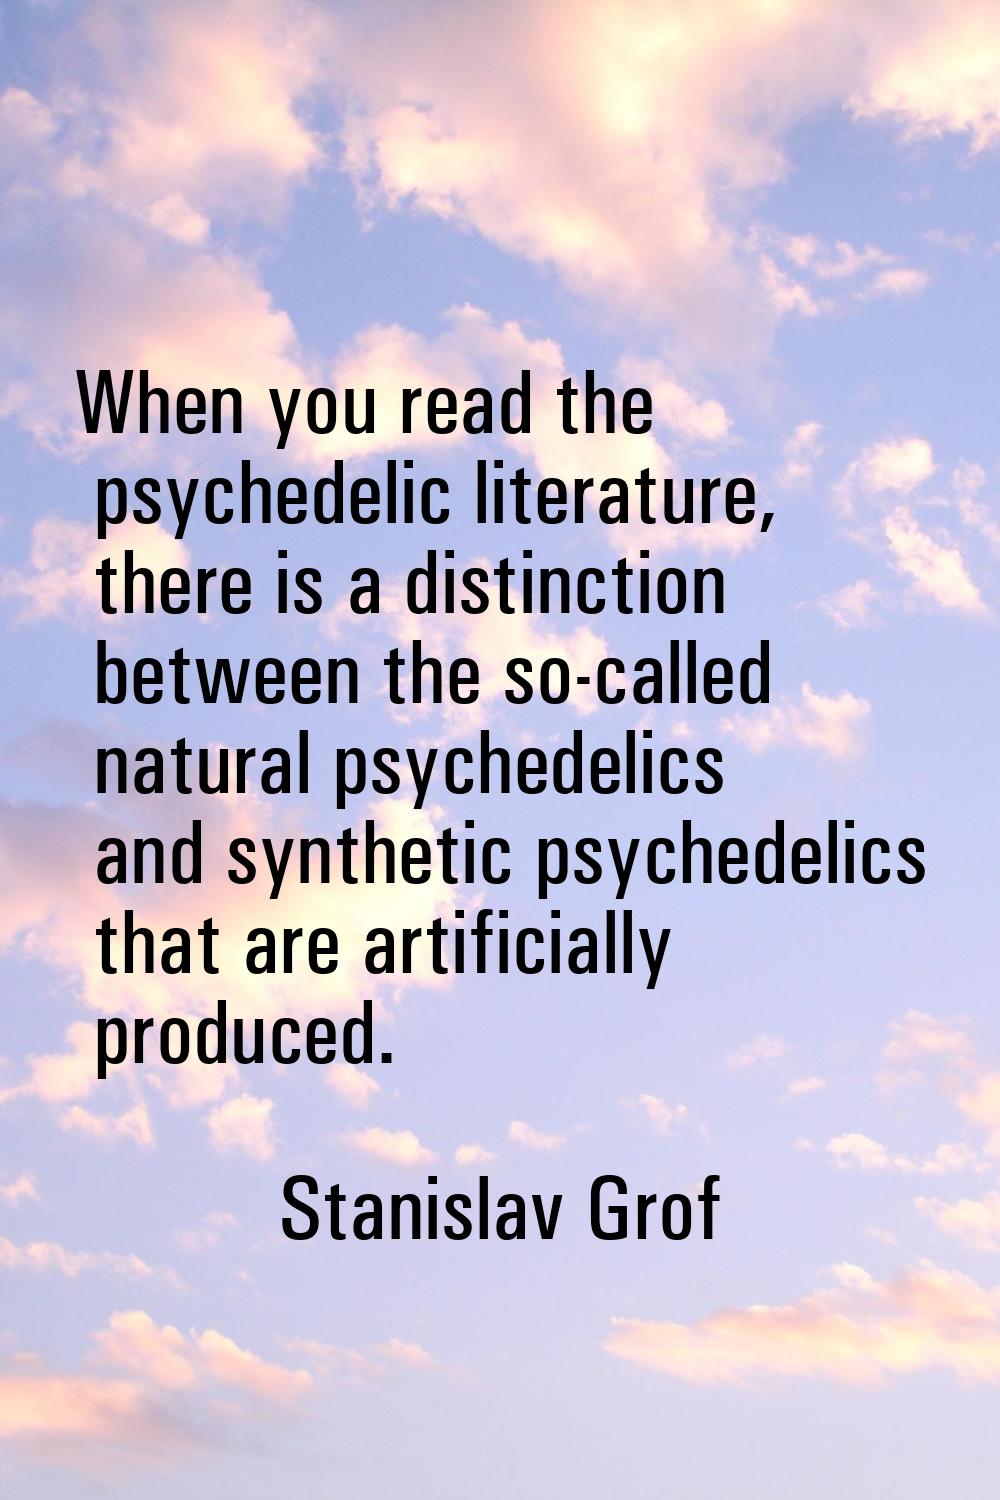 When you read the psychedelic literature, there is a distinction between the so-called natural psyc